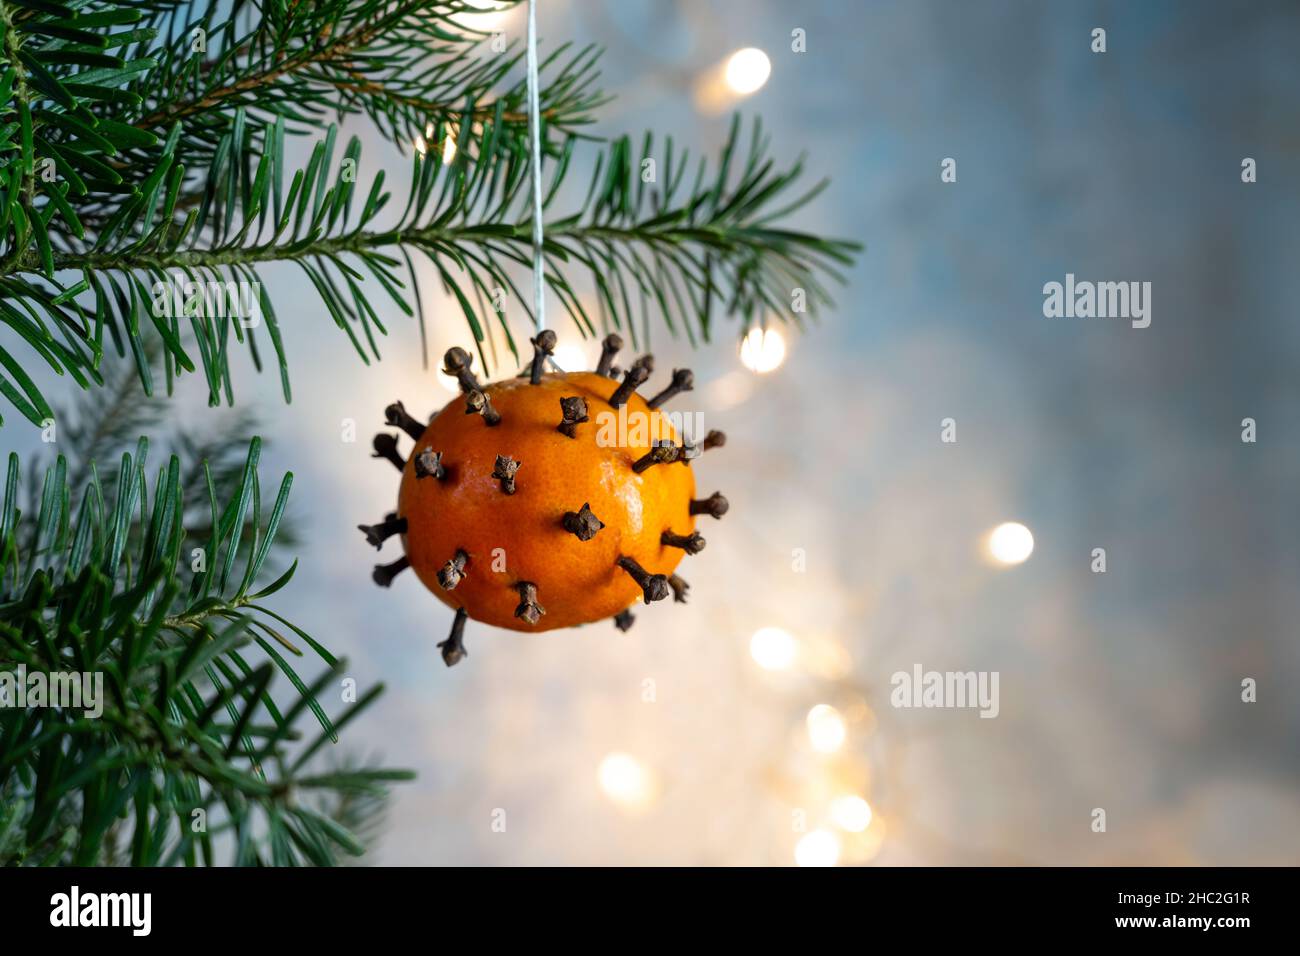 Christmas with SARS-CoV-2 Omicron variant, tangerine spiked with cloves as decoration and covid-19 symbol on the fir tree, background with bokeh light Stock Photo